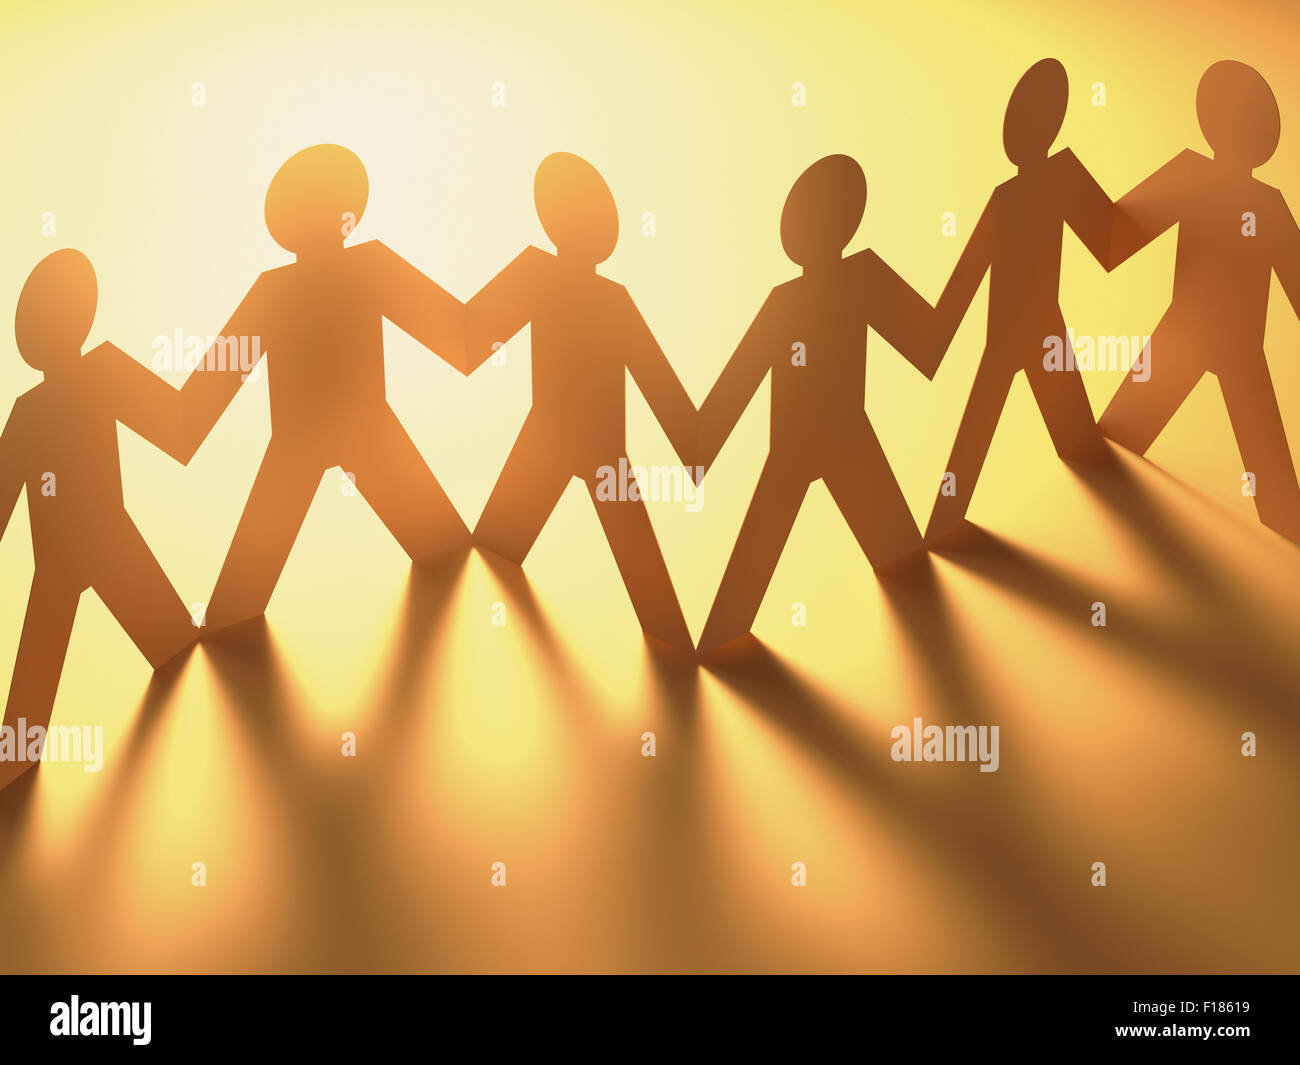 Paper cut in the shape of people together in a concept of a team. Clipping path included. Stock Photo